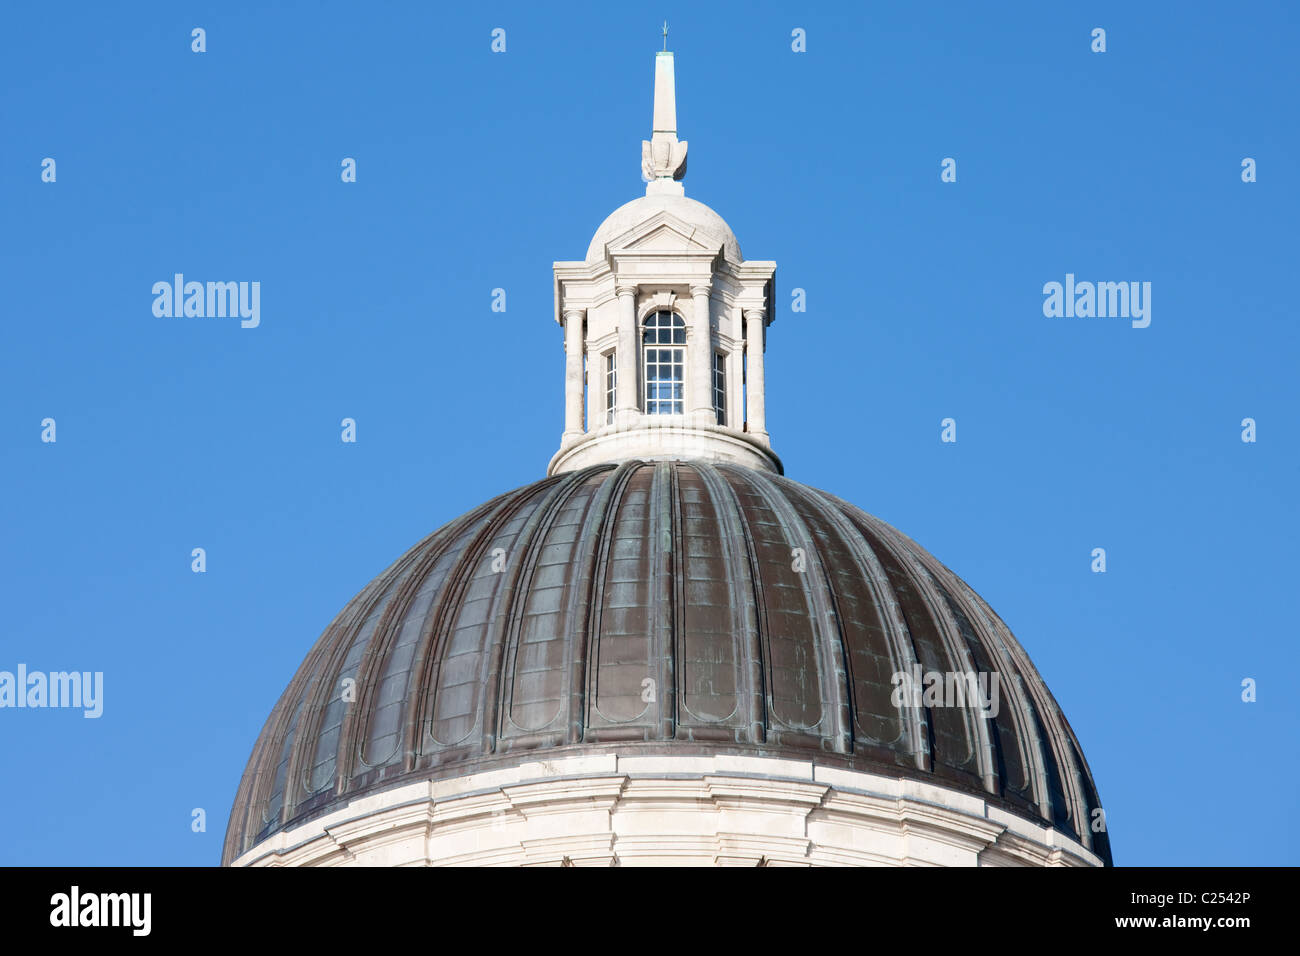 Copper domed roof, Port of Liverpool Building at Pier Head, Liverpool Stock Photo